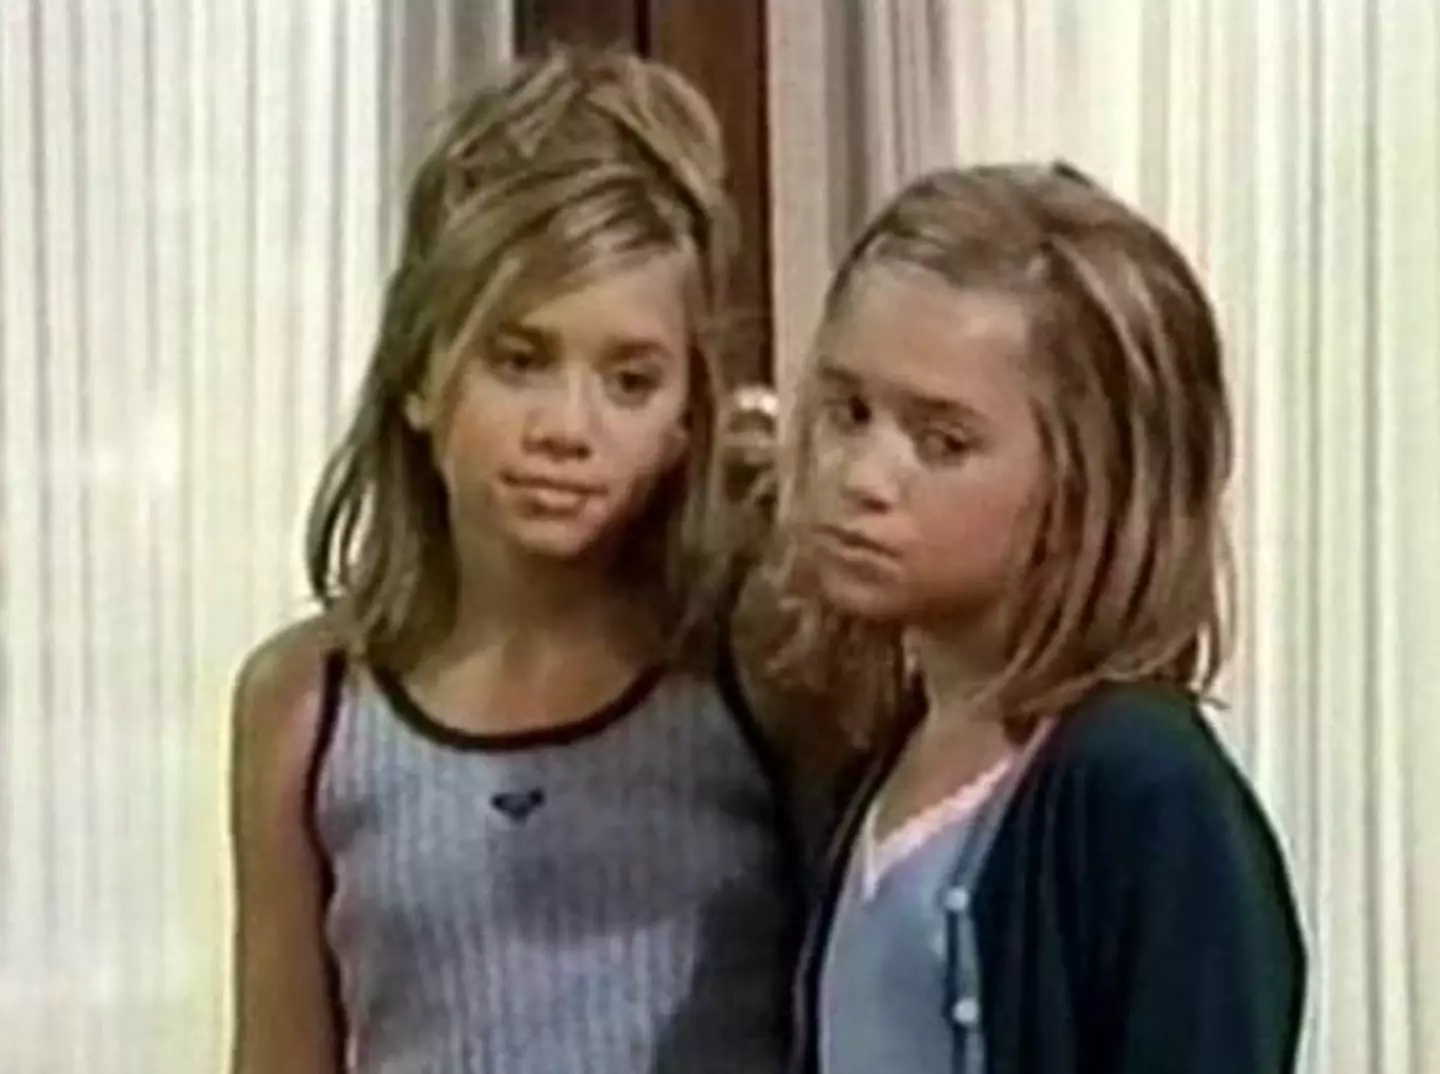 Mary-Kate and Ashley typically appeared in movies and TV shows together.